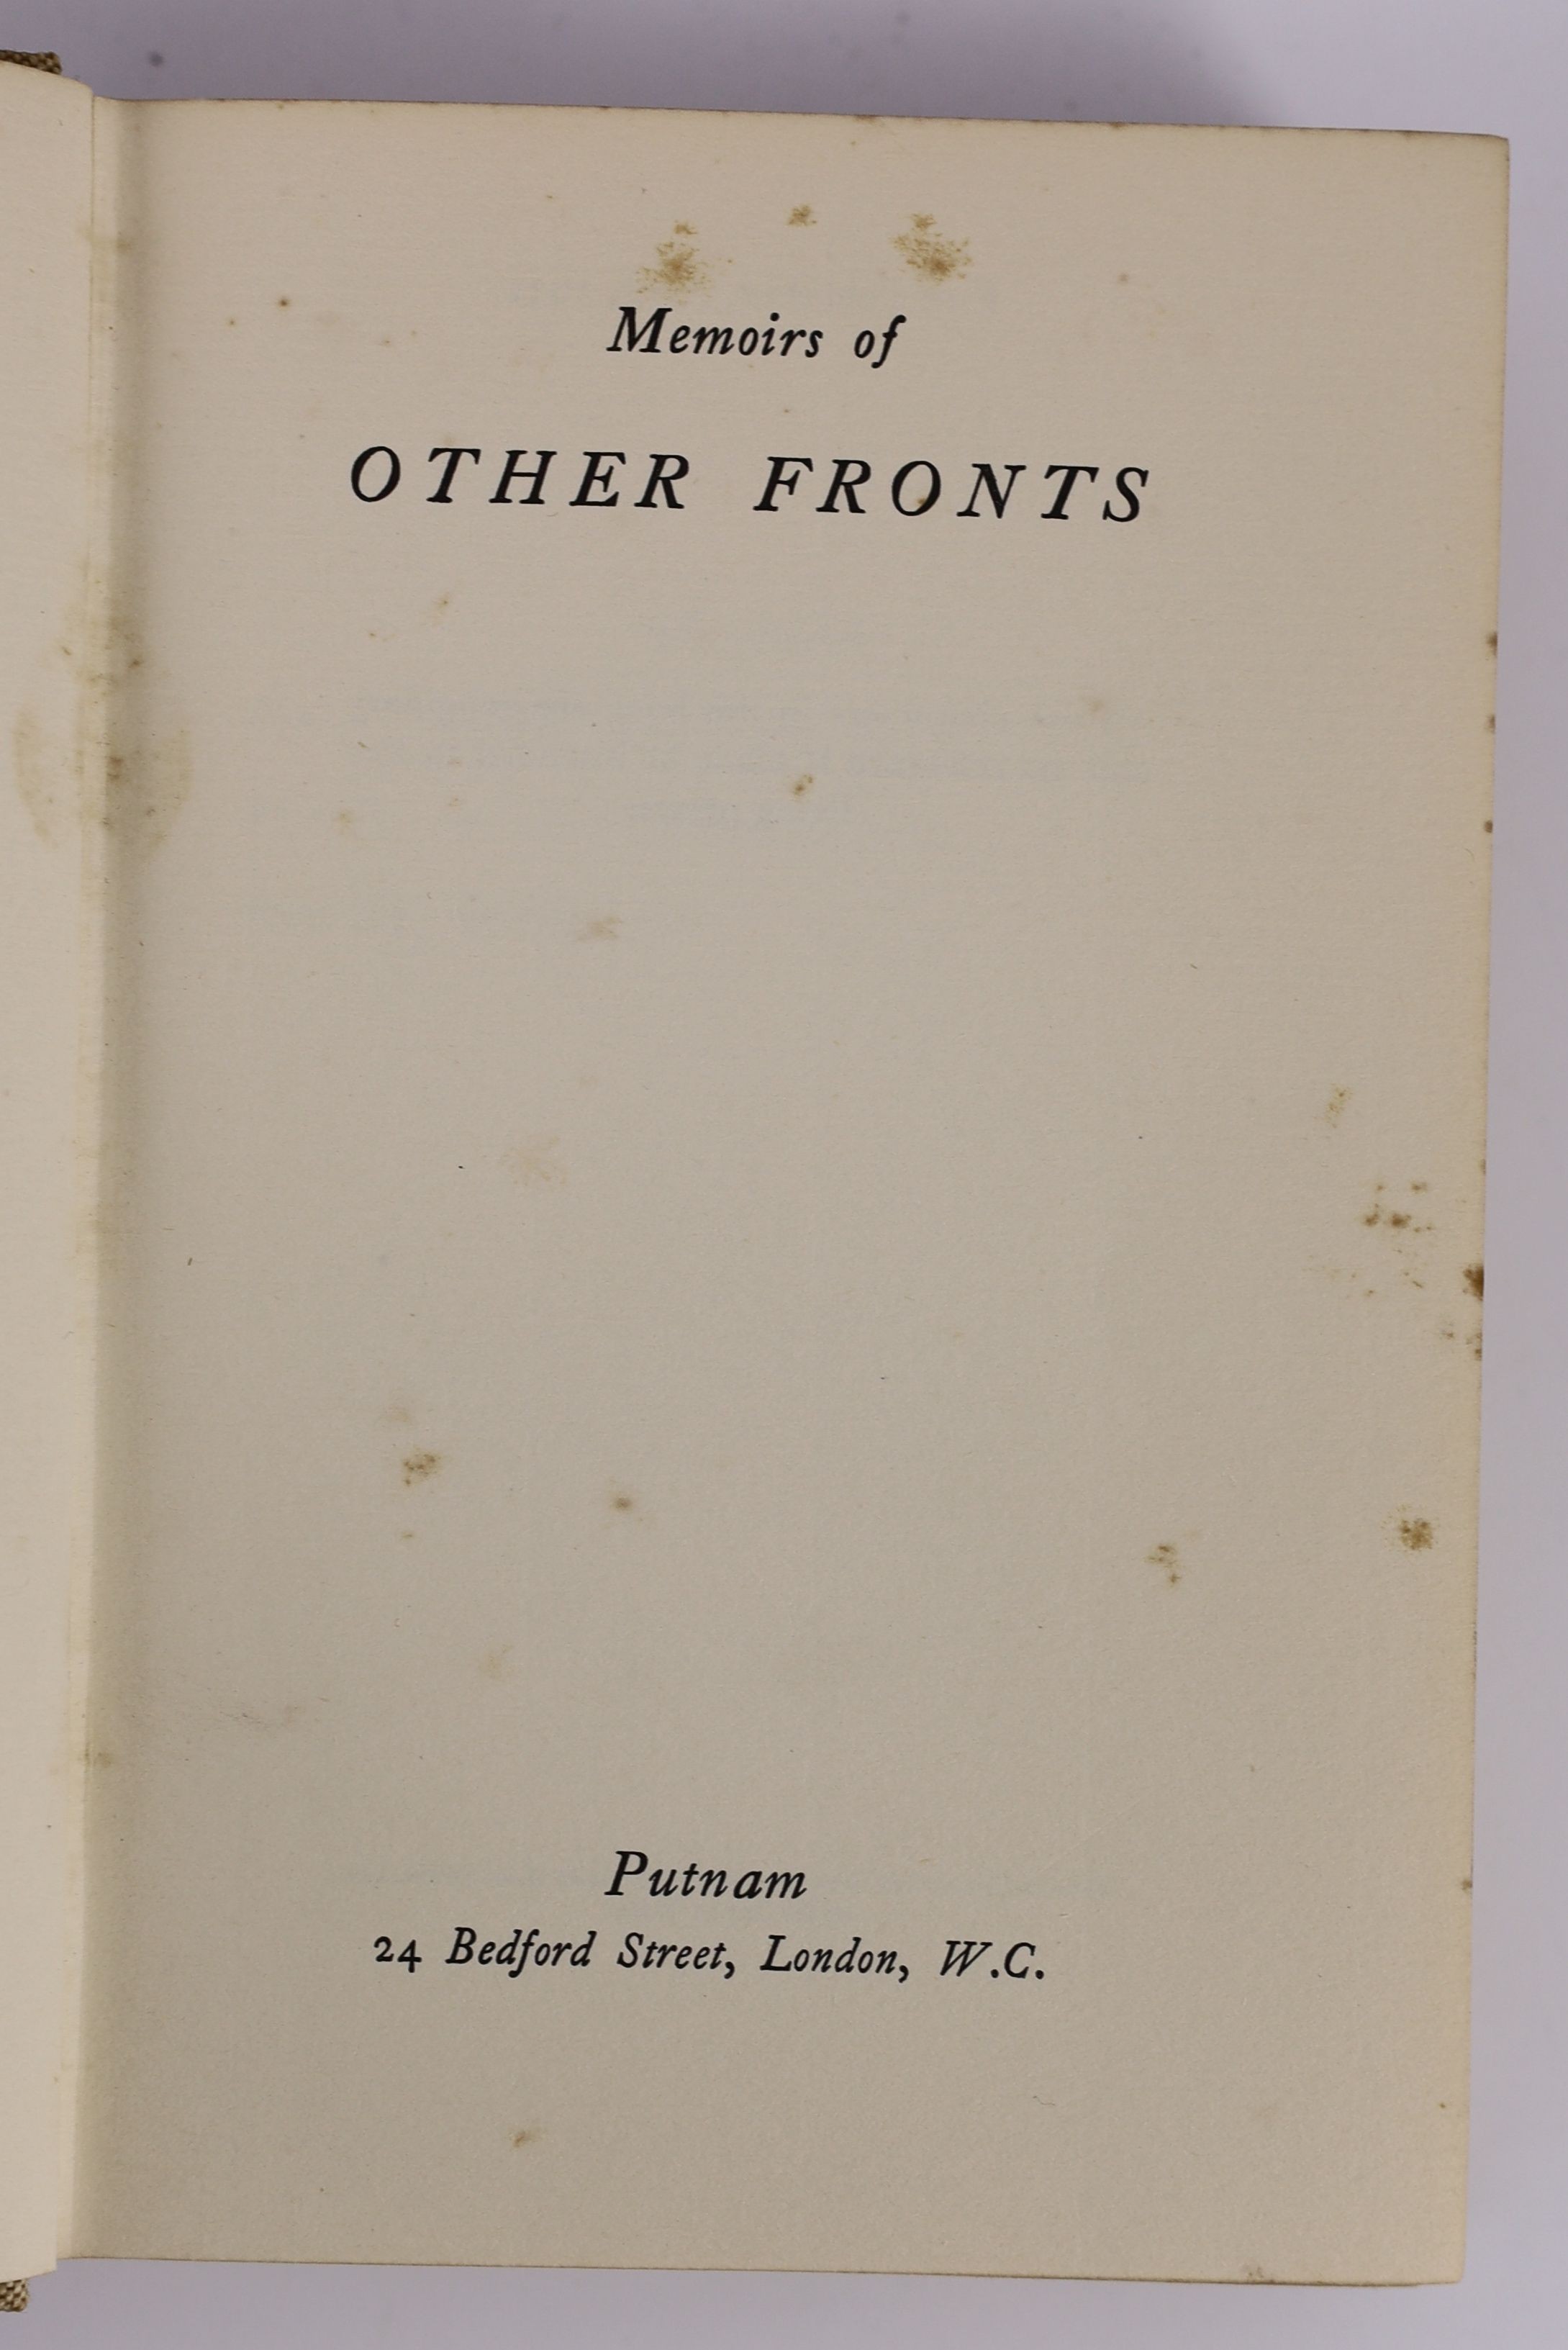 Anon (John Rodker) - Memoirs of Other Fronts. 1st ed. Publishers cloth with letters direct on spine and original printed d/j designed by Paul Nash. 8vo. Putnam, London, 1932.